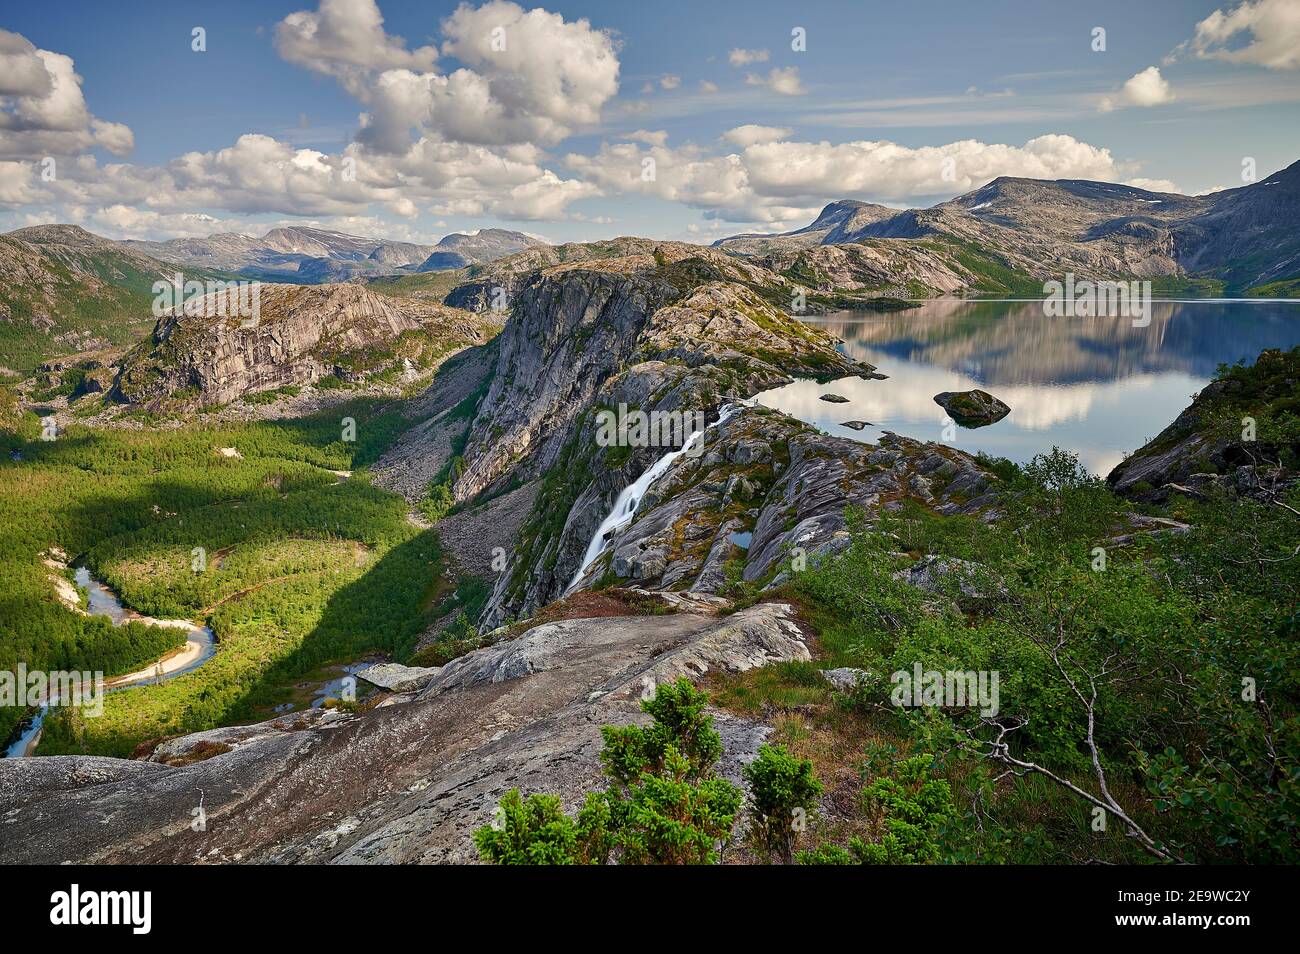 Rago Nationalpark in in the municipality of Sørfold in Nordland county, Norway. The lakes Storskogvatnet and Litlverivatnet lie within the park. Stock Photo